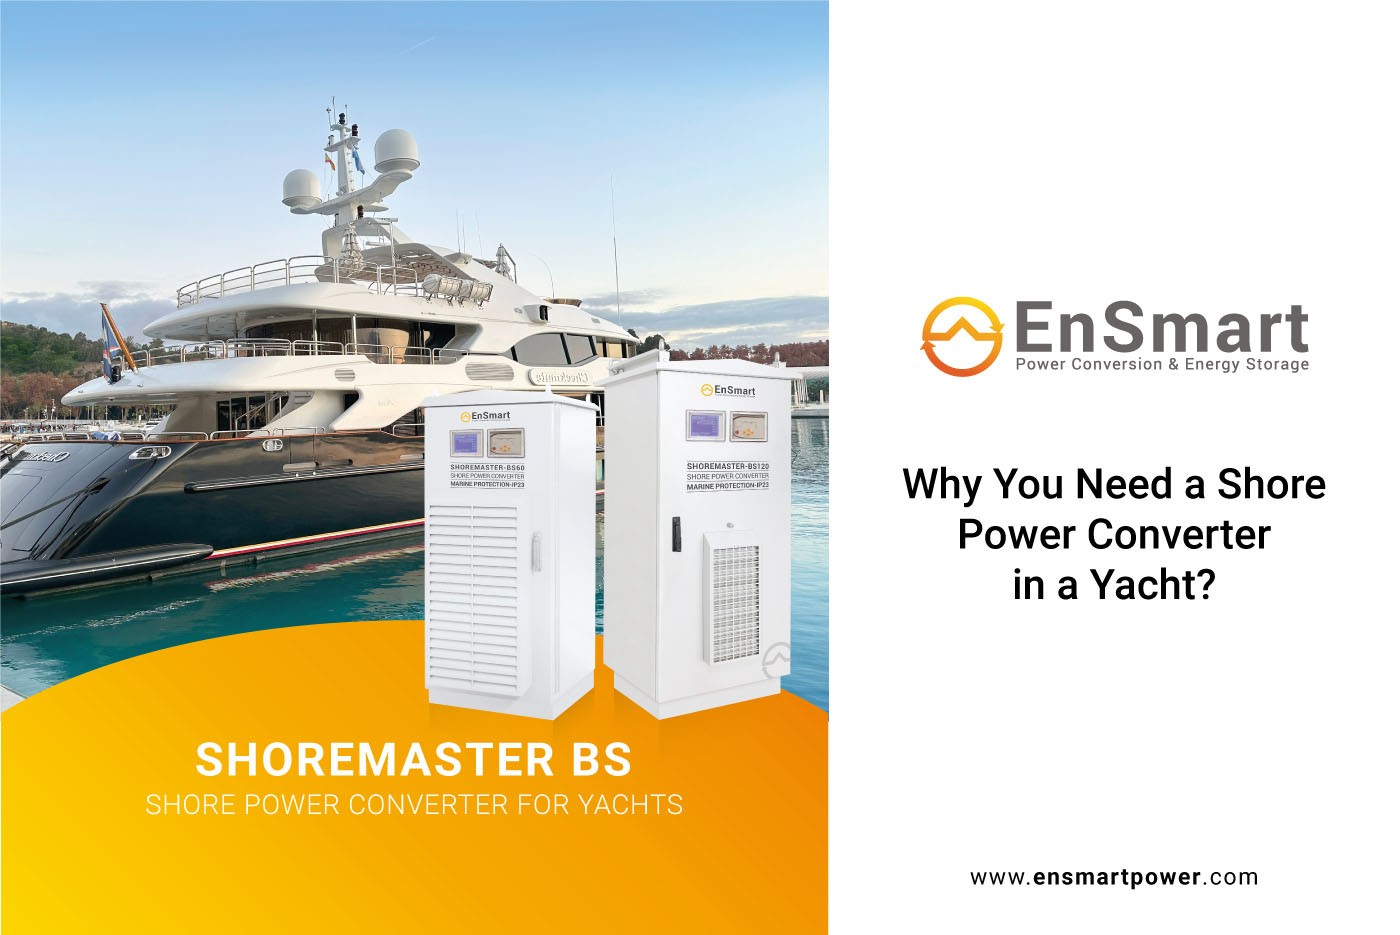 Why You Need a Shore Power Converter in a Yacht?